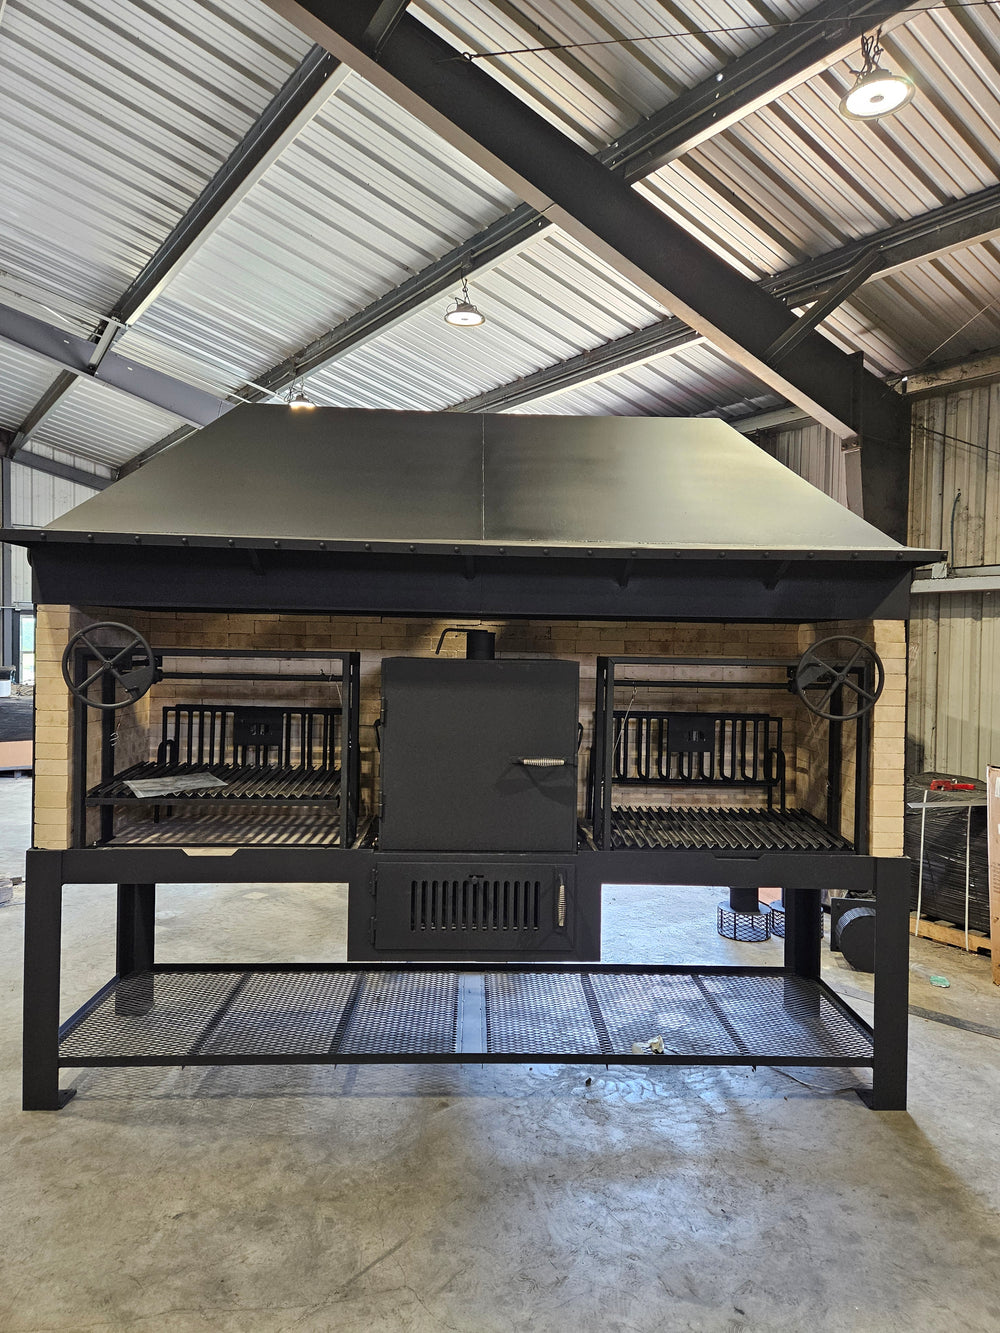 Commercial 3 Sectional Fire Table Grill